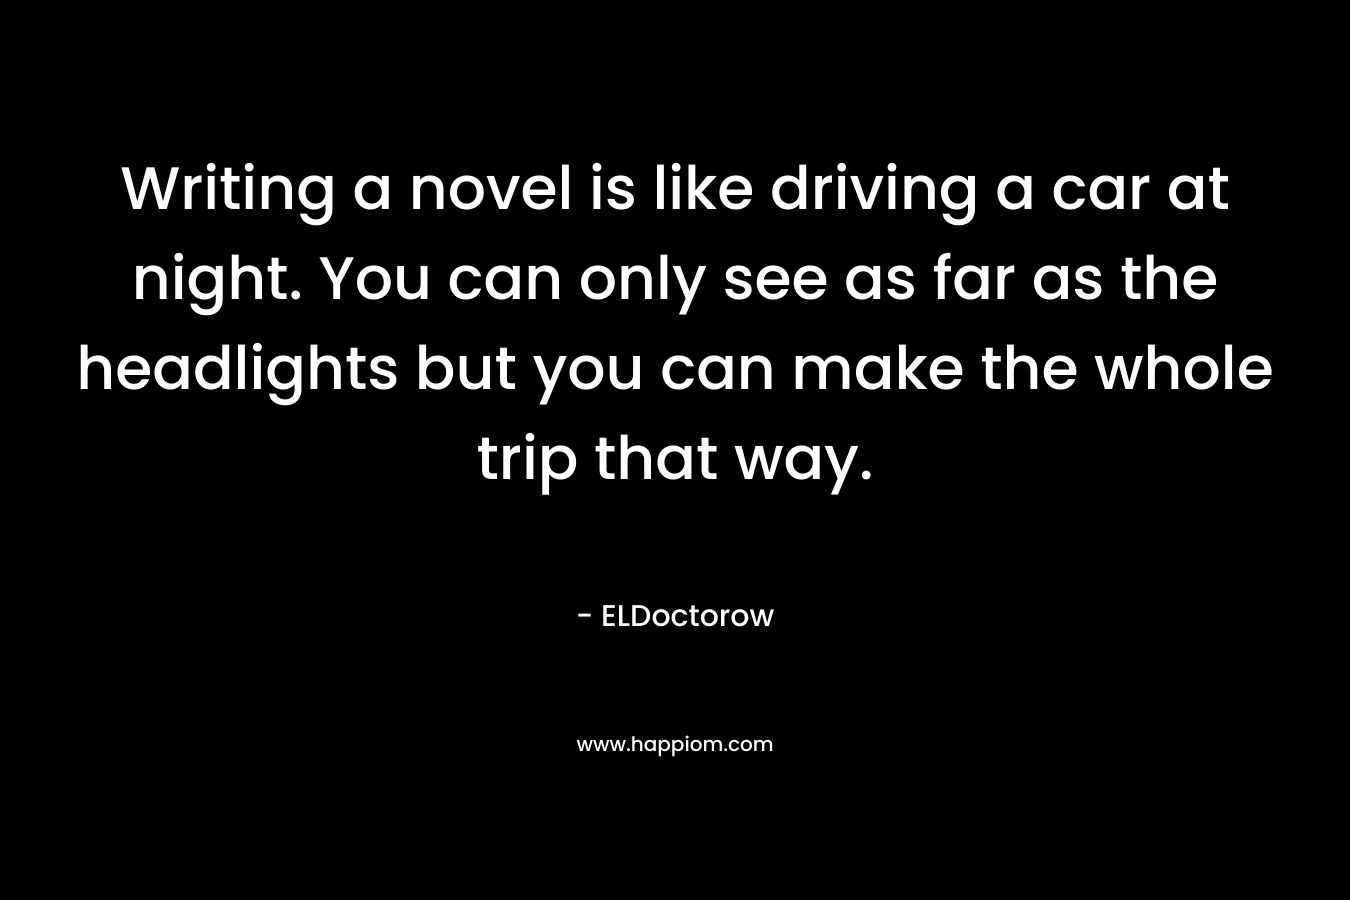 Writing a novel is like driving a car at night. You can only see as far as the headlights but you can make the whole trip that way.